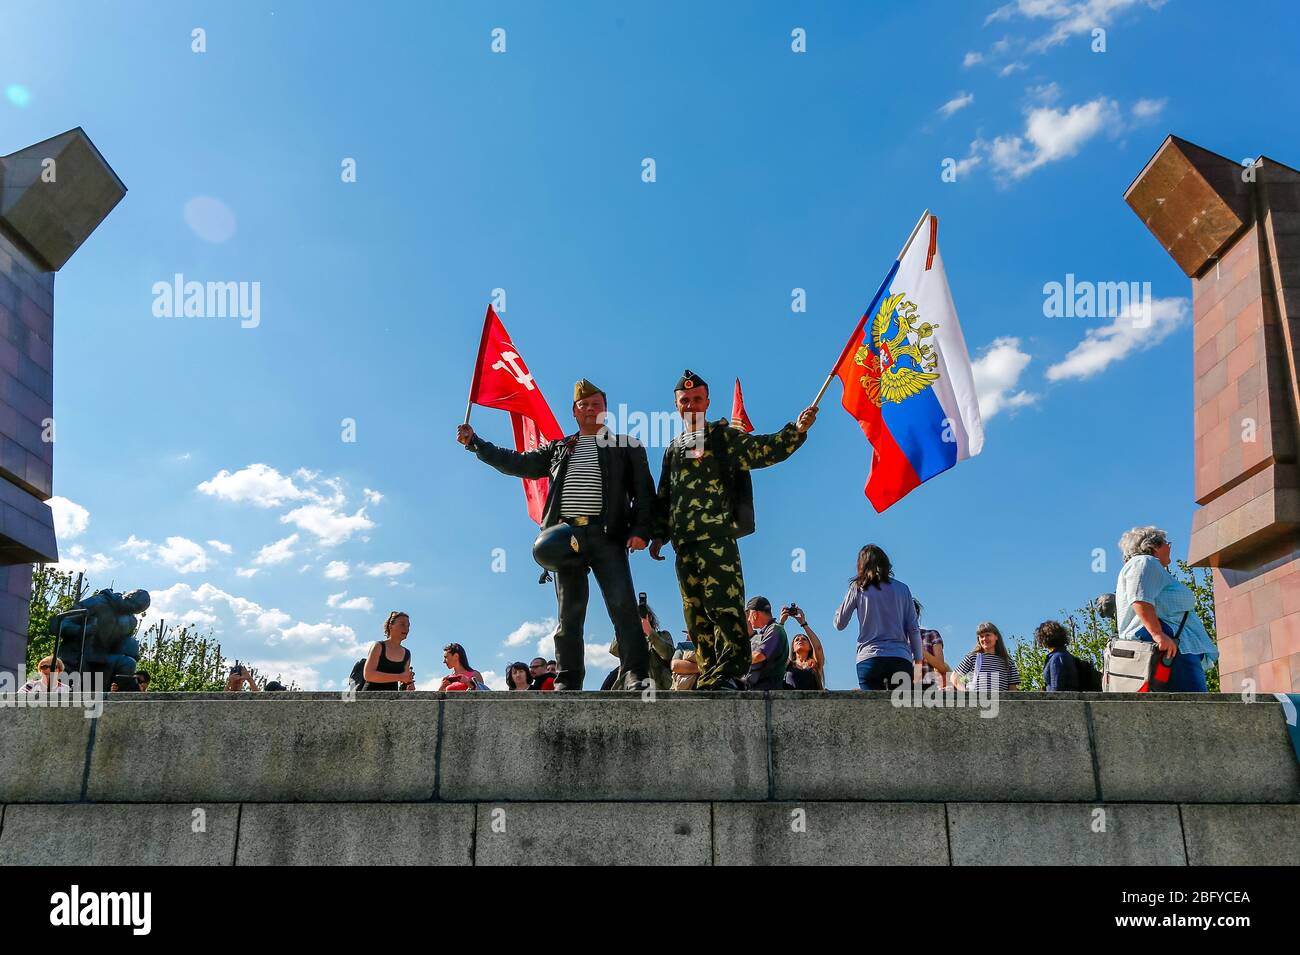 May 9, 2016, Berlin, at the Soviet War Memorial in Treptower Park (Treptower War Memorial), a memorial and at the same time a military cemetery, numerous Russians and German-Russians with many colorful flags commemorate the 71st day of victory at the end of the Second World War. The memorial was erected in Germany in 1949 on the instructions of the Soviet military administration to honor the soldiers of the Red Army who died in World War II. Over 7000 of the soldiers who died in the Schlaughs around Berlin are buried here. Men, some in uniform, pose with the Russian and Soviet national flags. Stock Photo